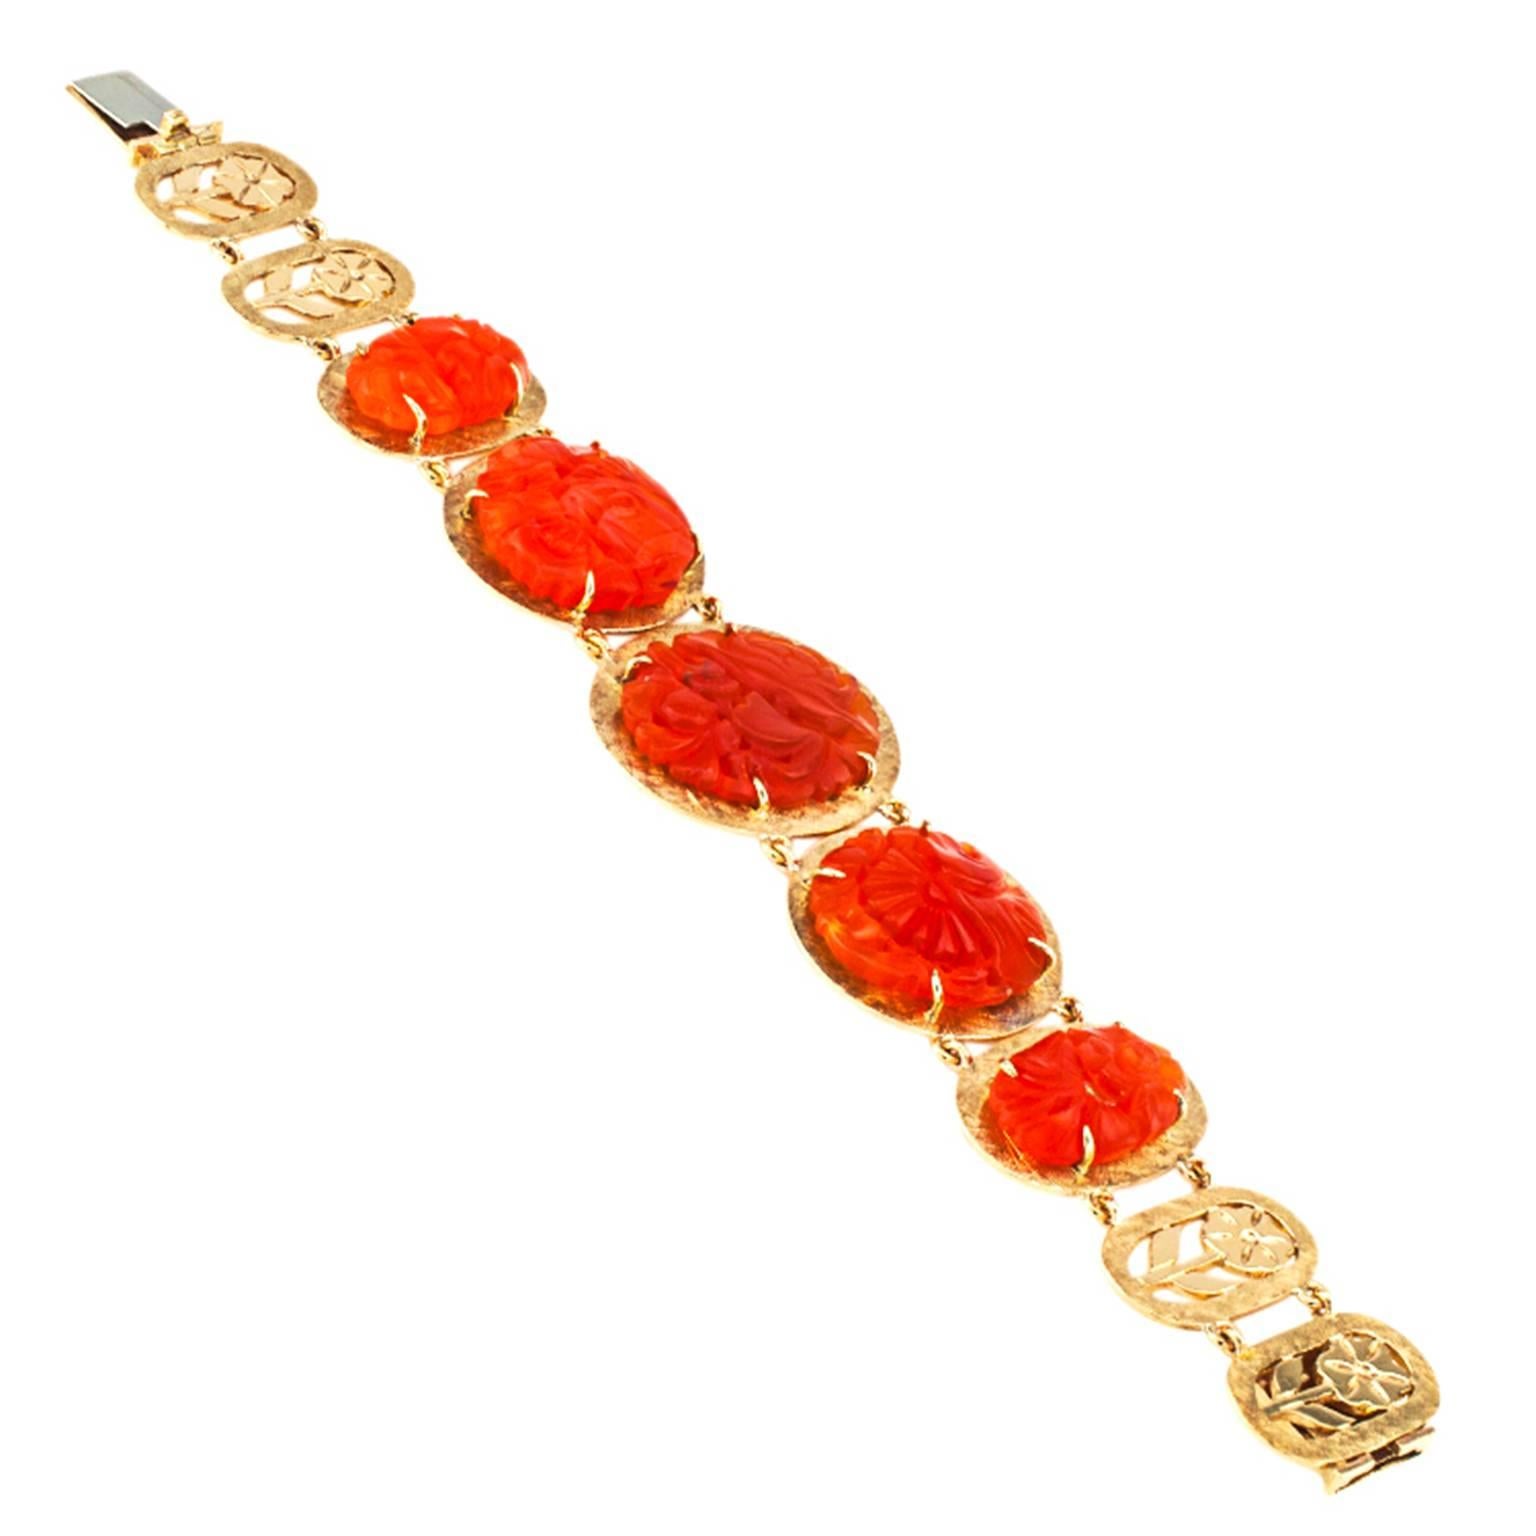 Unique Carved Carnelian and Gold Bracelet

A crafty magician must have gone around and captured flashes of orange color from a glorious sunset, from fall foliage, from rose petals in a magic garden,  and from the brilliance of the rising sun.  He